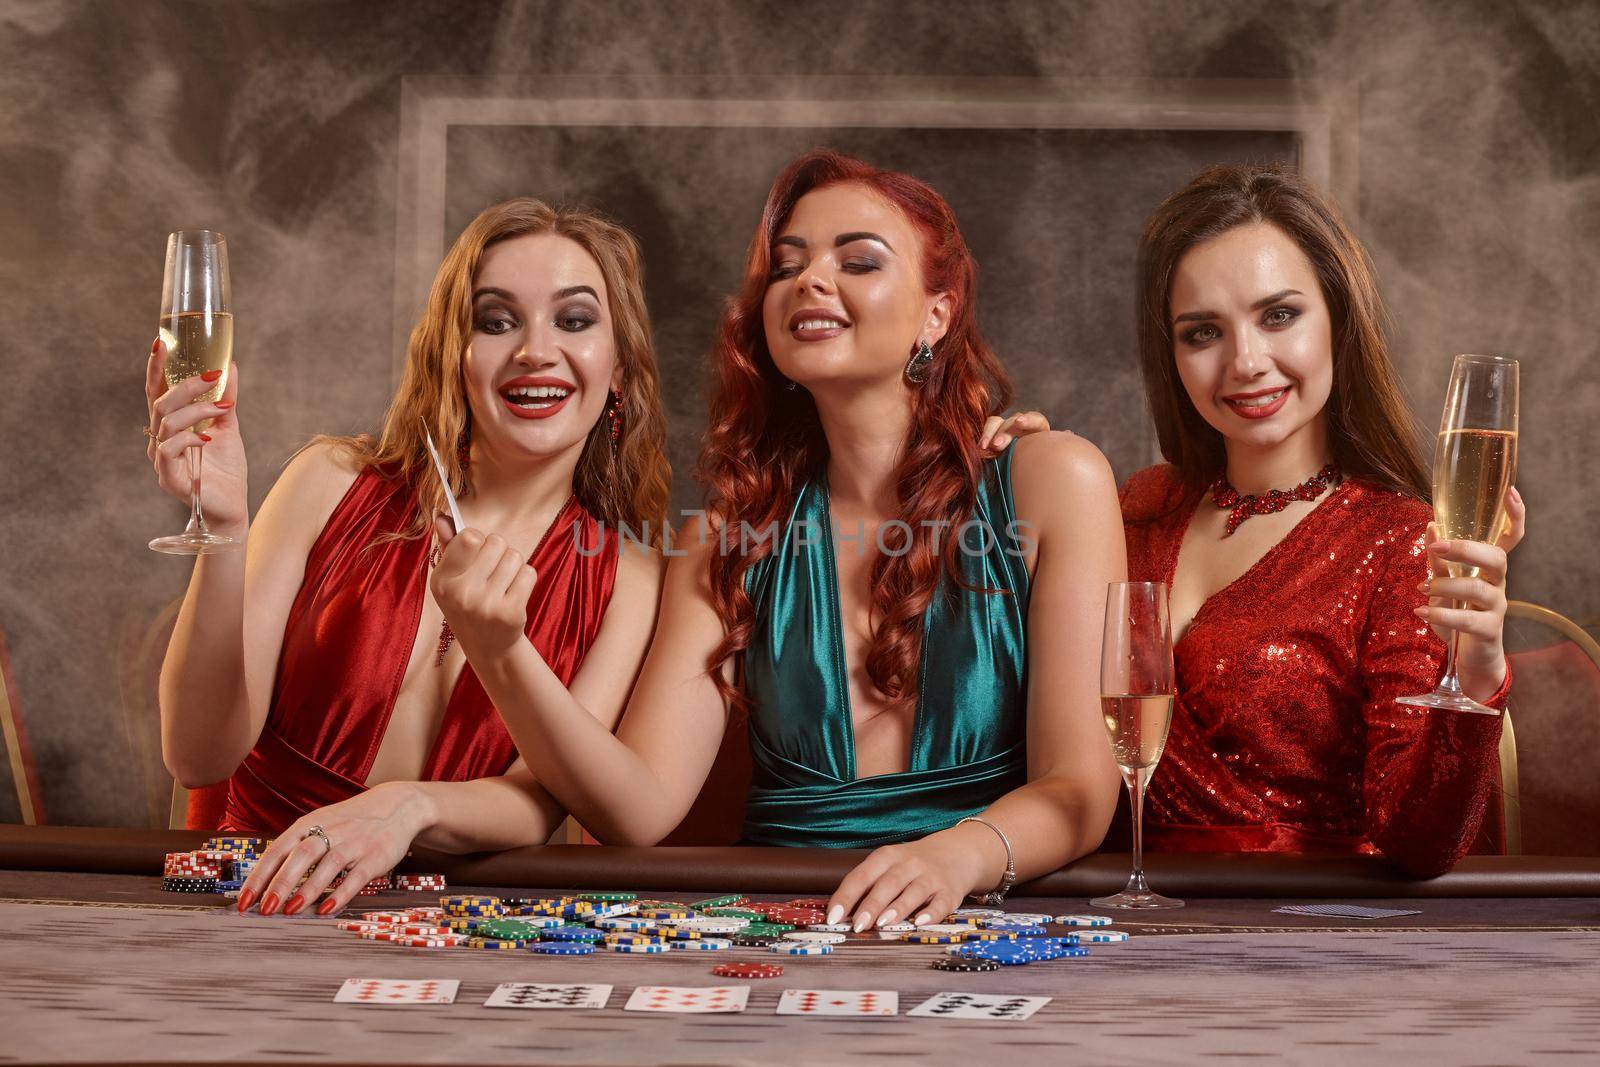 Beautiful females are playing poker at casino. They are celebrating their win, smiling, looking at the camera and posing at the table against a a dark smoke background. Cards, chips, money, alcohol, gambling, entertainment concept.